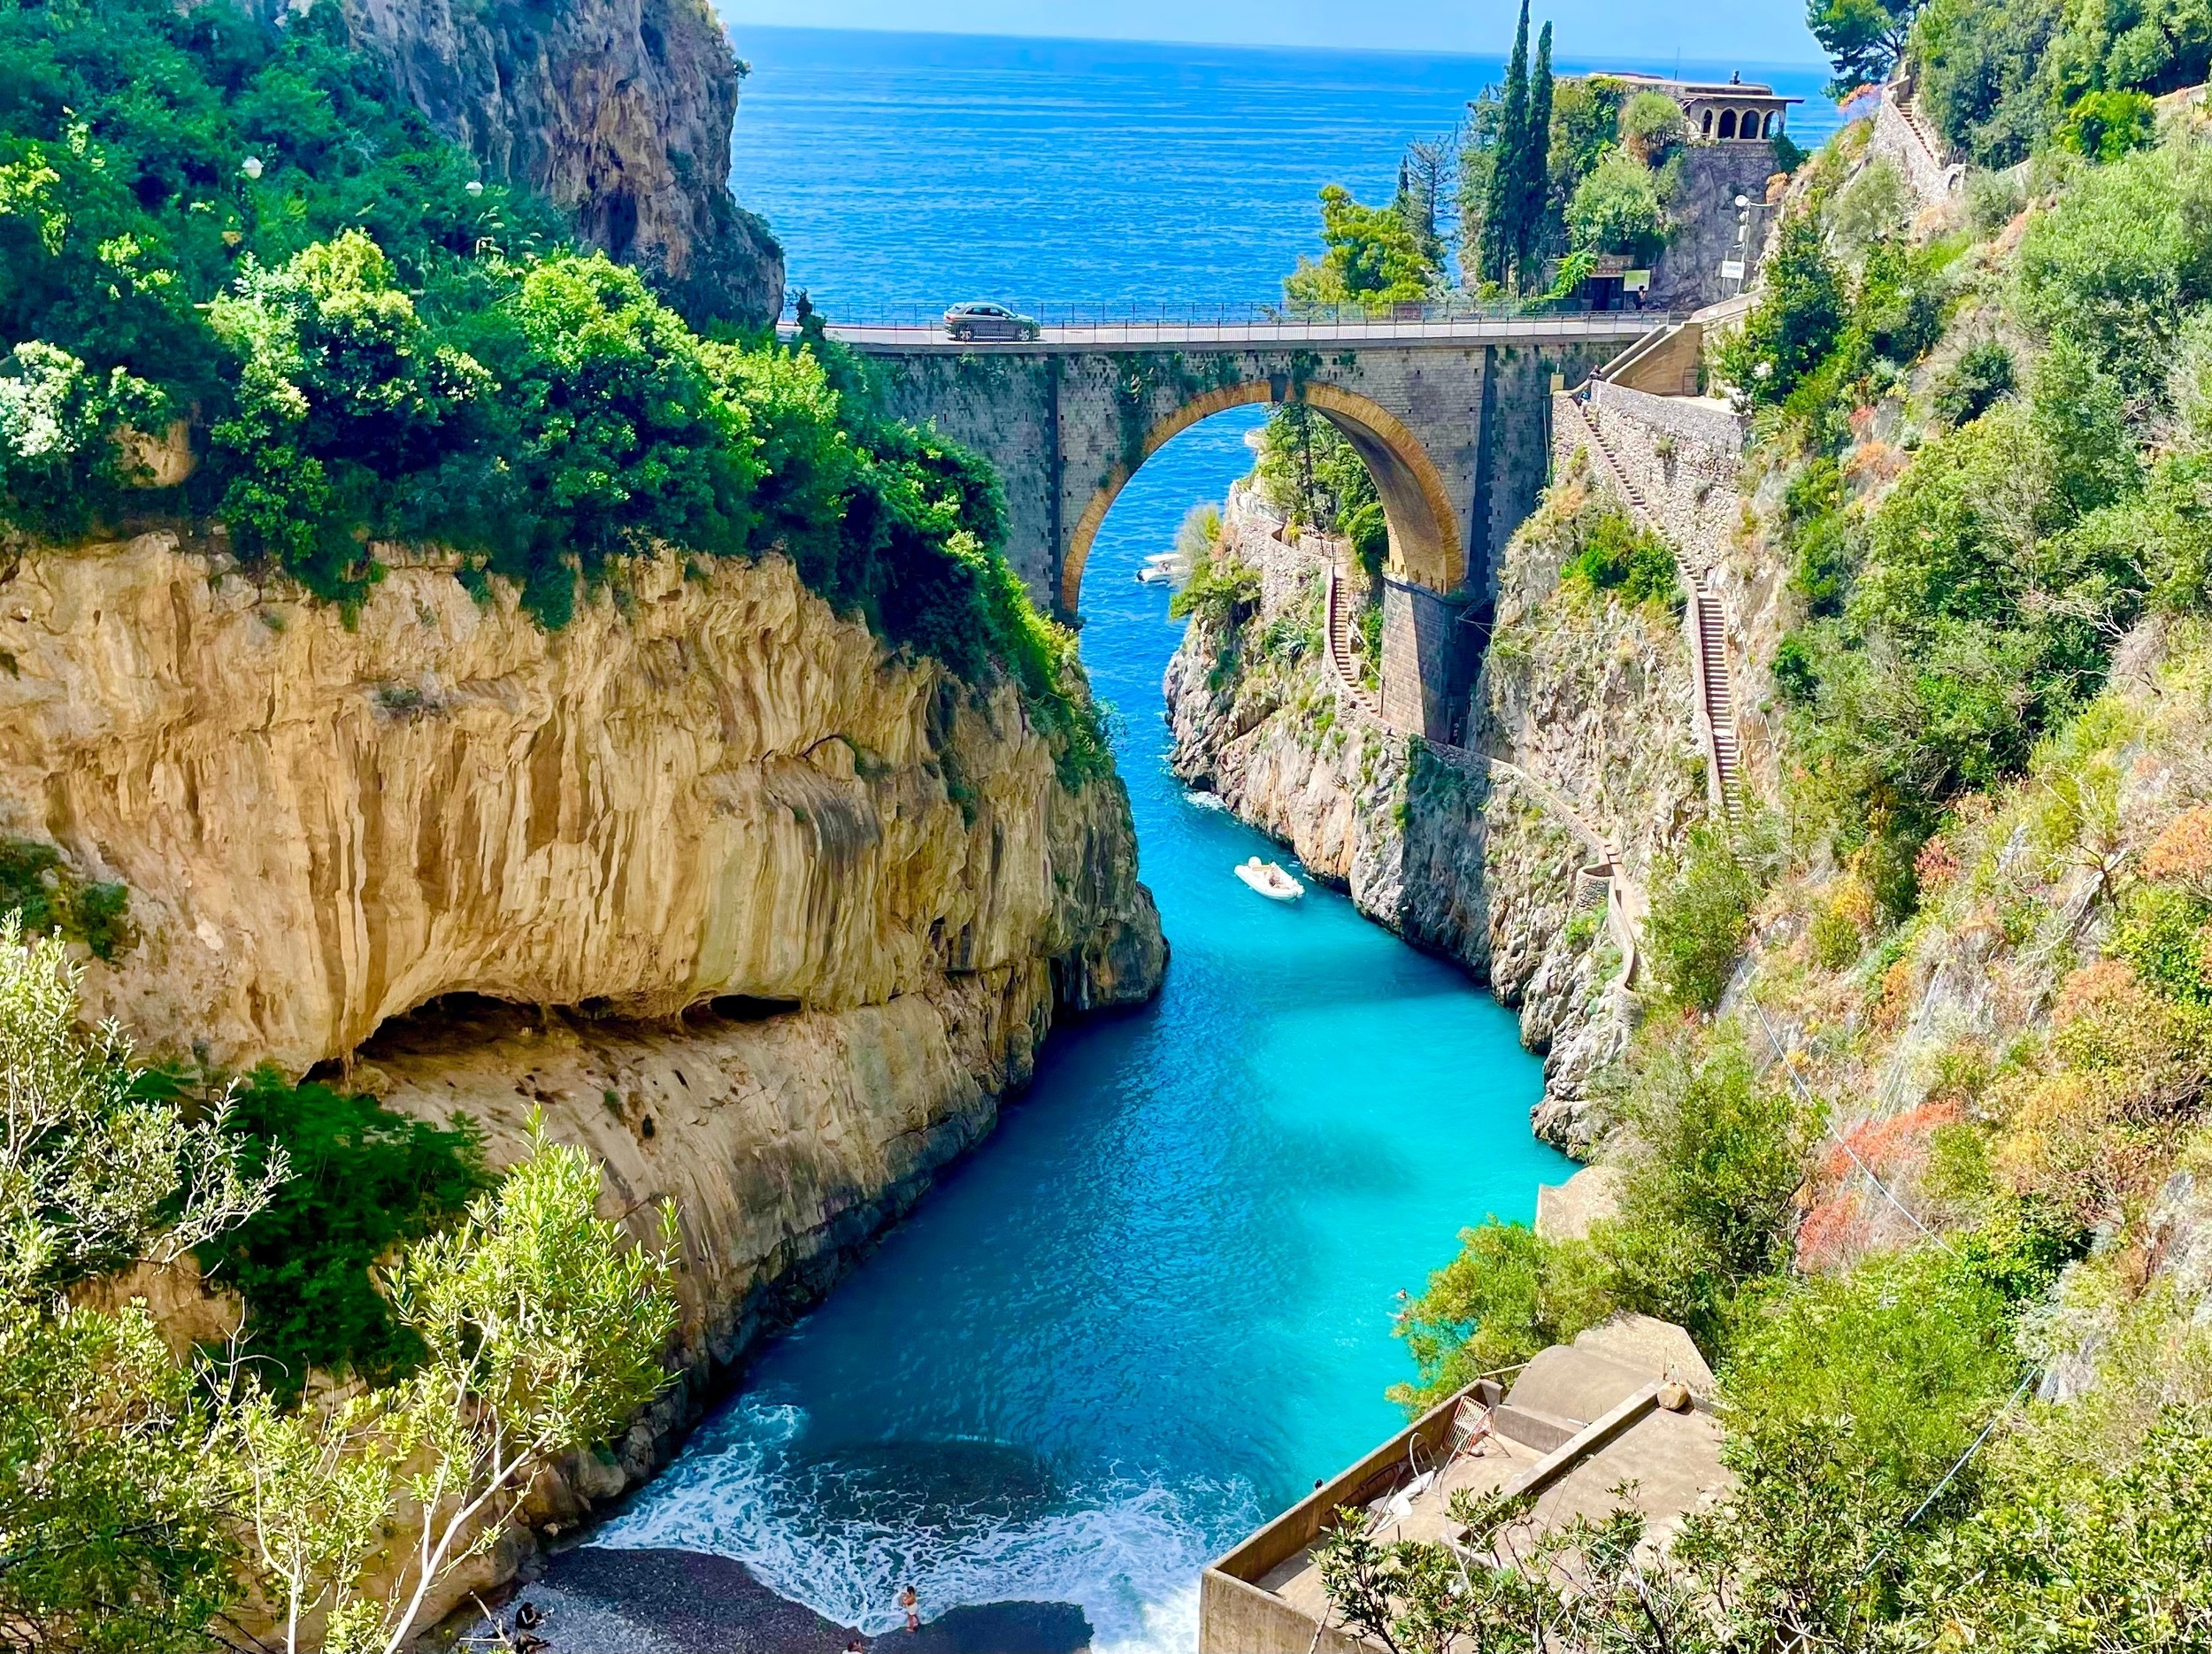 <p>It would be almost criminal to leave Italy’s most iconic stretch of coast off this list. And it’s best explored by car if you can stomach the narrow roads and occasional street cliffside drop-offs. Start in Salerno and head to the town of Amalfi before heading to Ravello, Positano, and Sorrento.</p><p><a href='https://www.msn.com/en-us/community/channel/vid-cj9pqbr0vn9in2b6ddcd8sfgpfq6x6utp44fssrv6mc2gtybw0us'>Follow us on MSN to see more of our exclusive lifestyle content.</a></p>